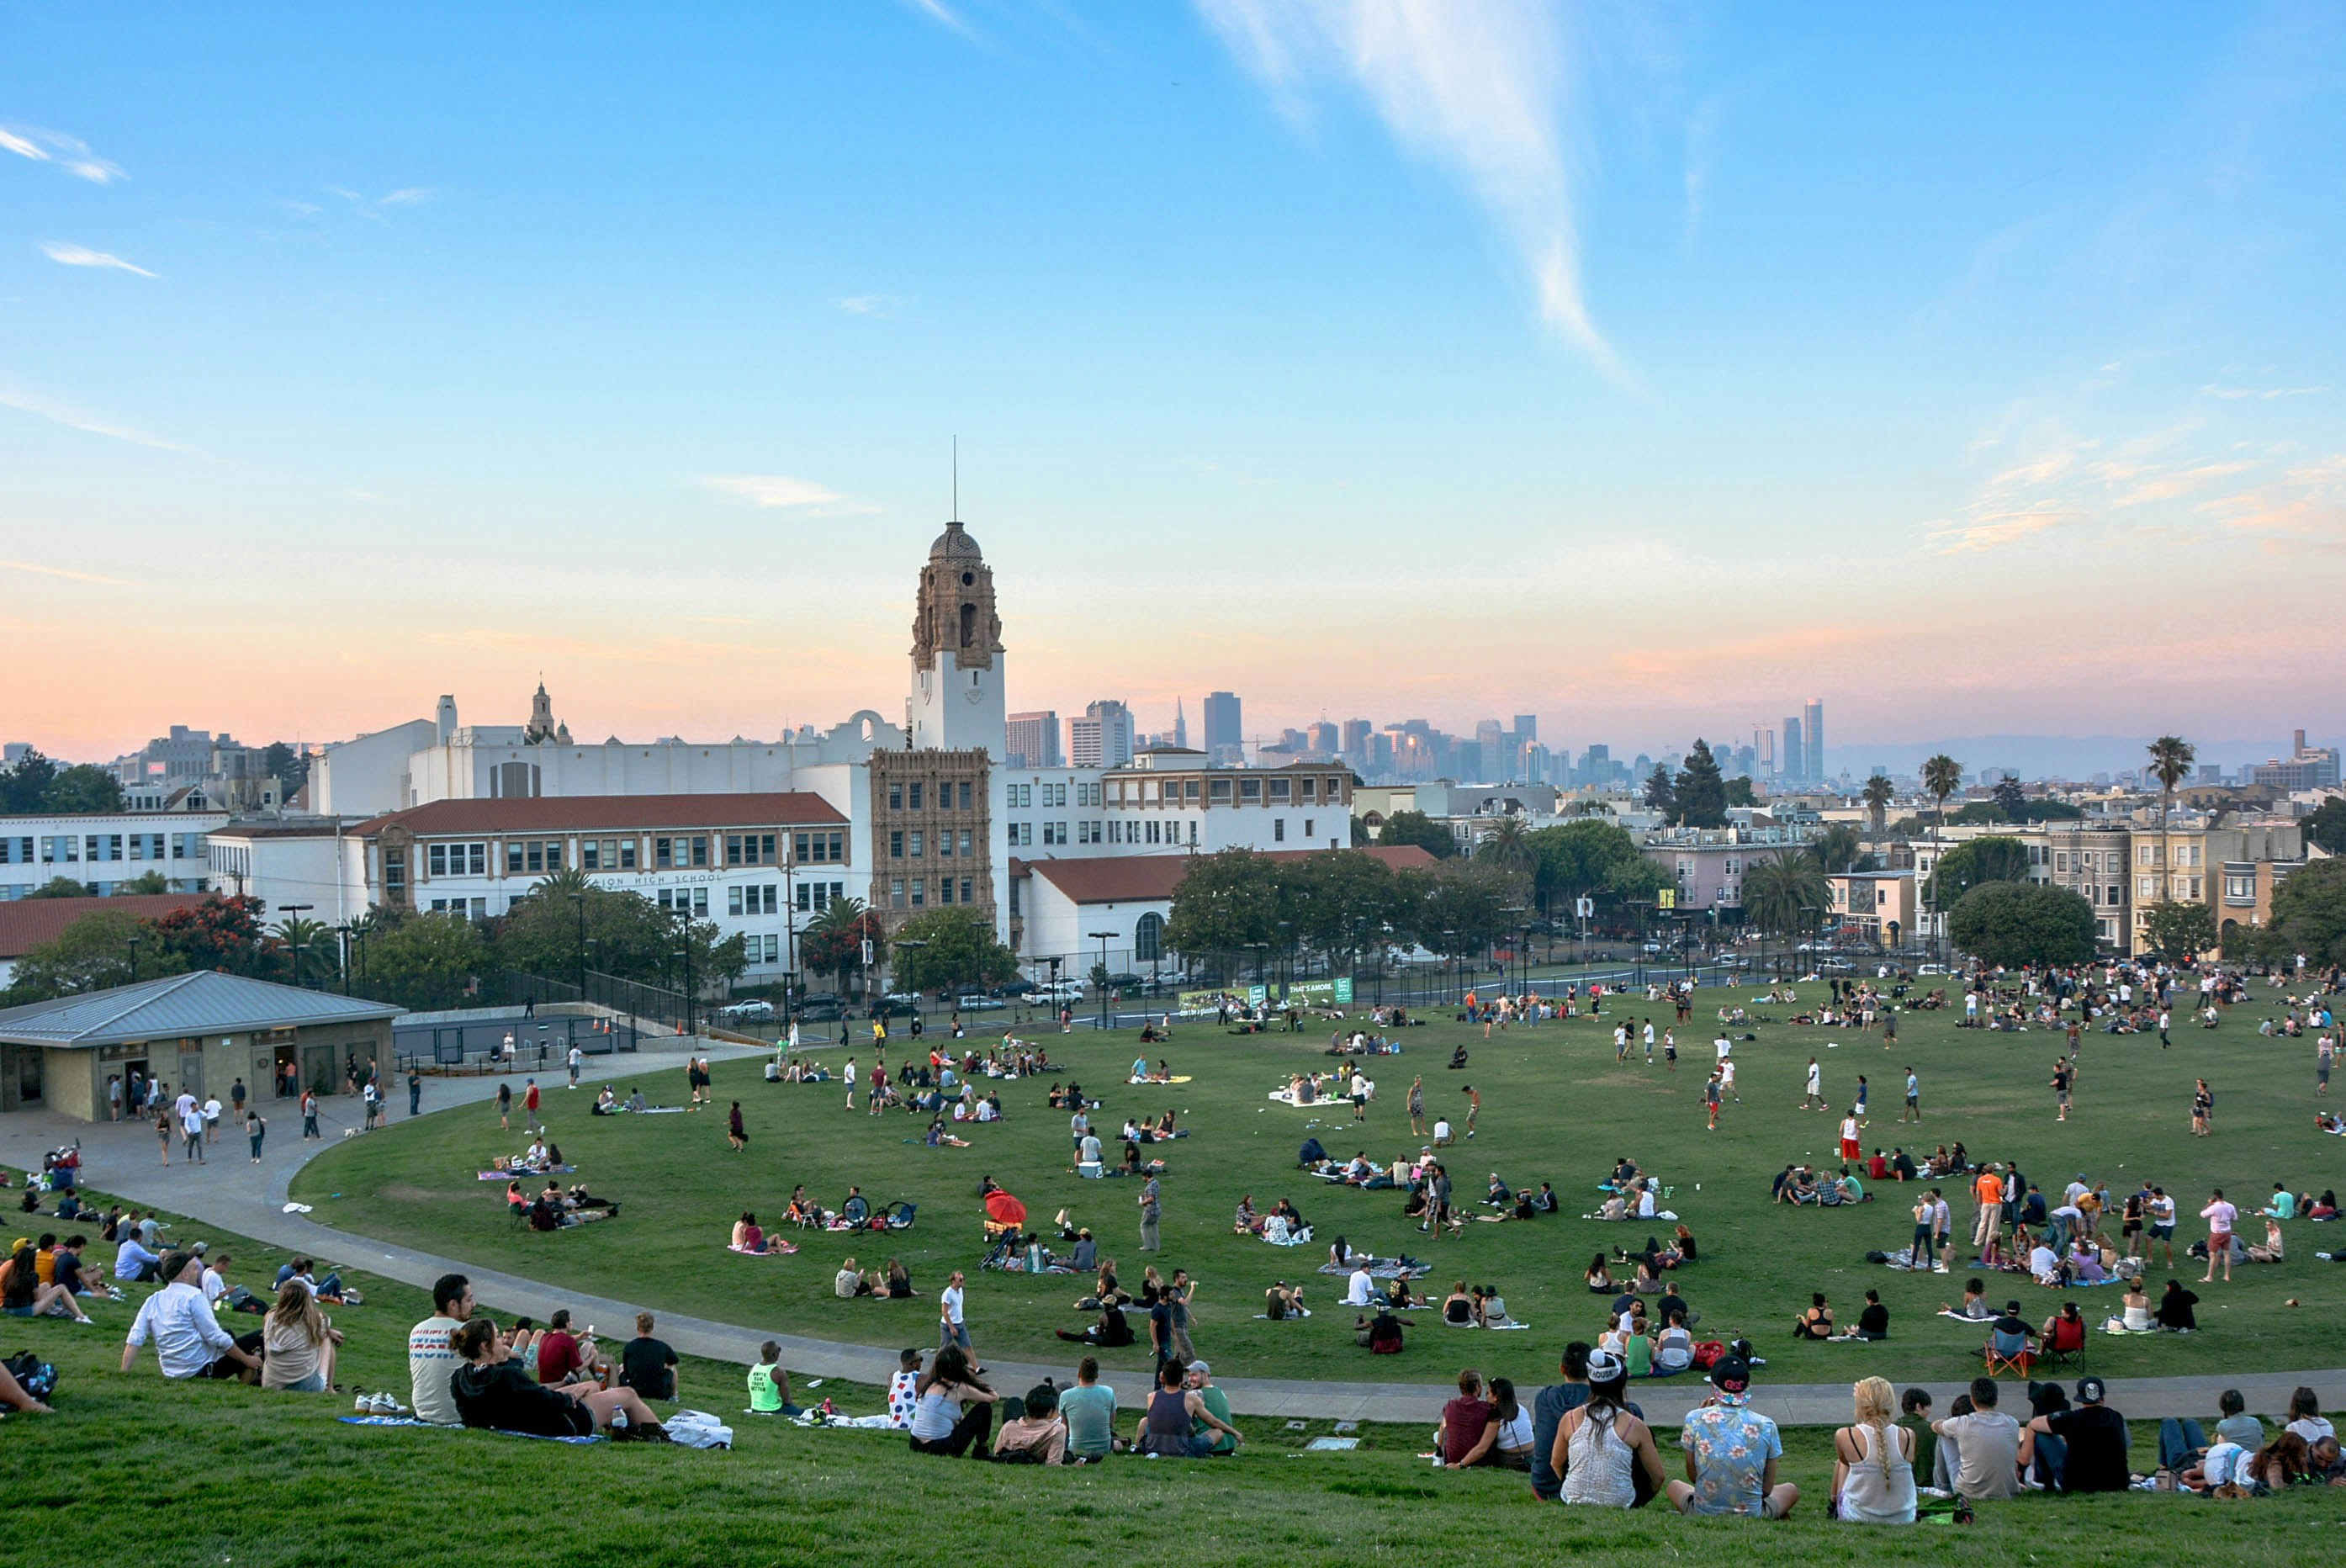 The large green lawn at Dolores Park is filled with people laying on blankets, walking around or playing around.